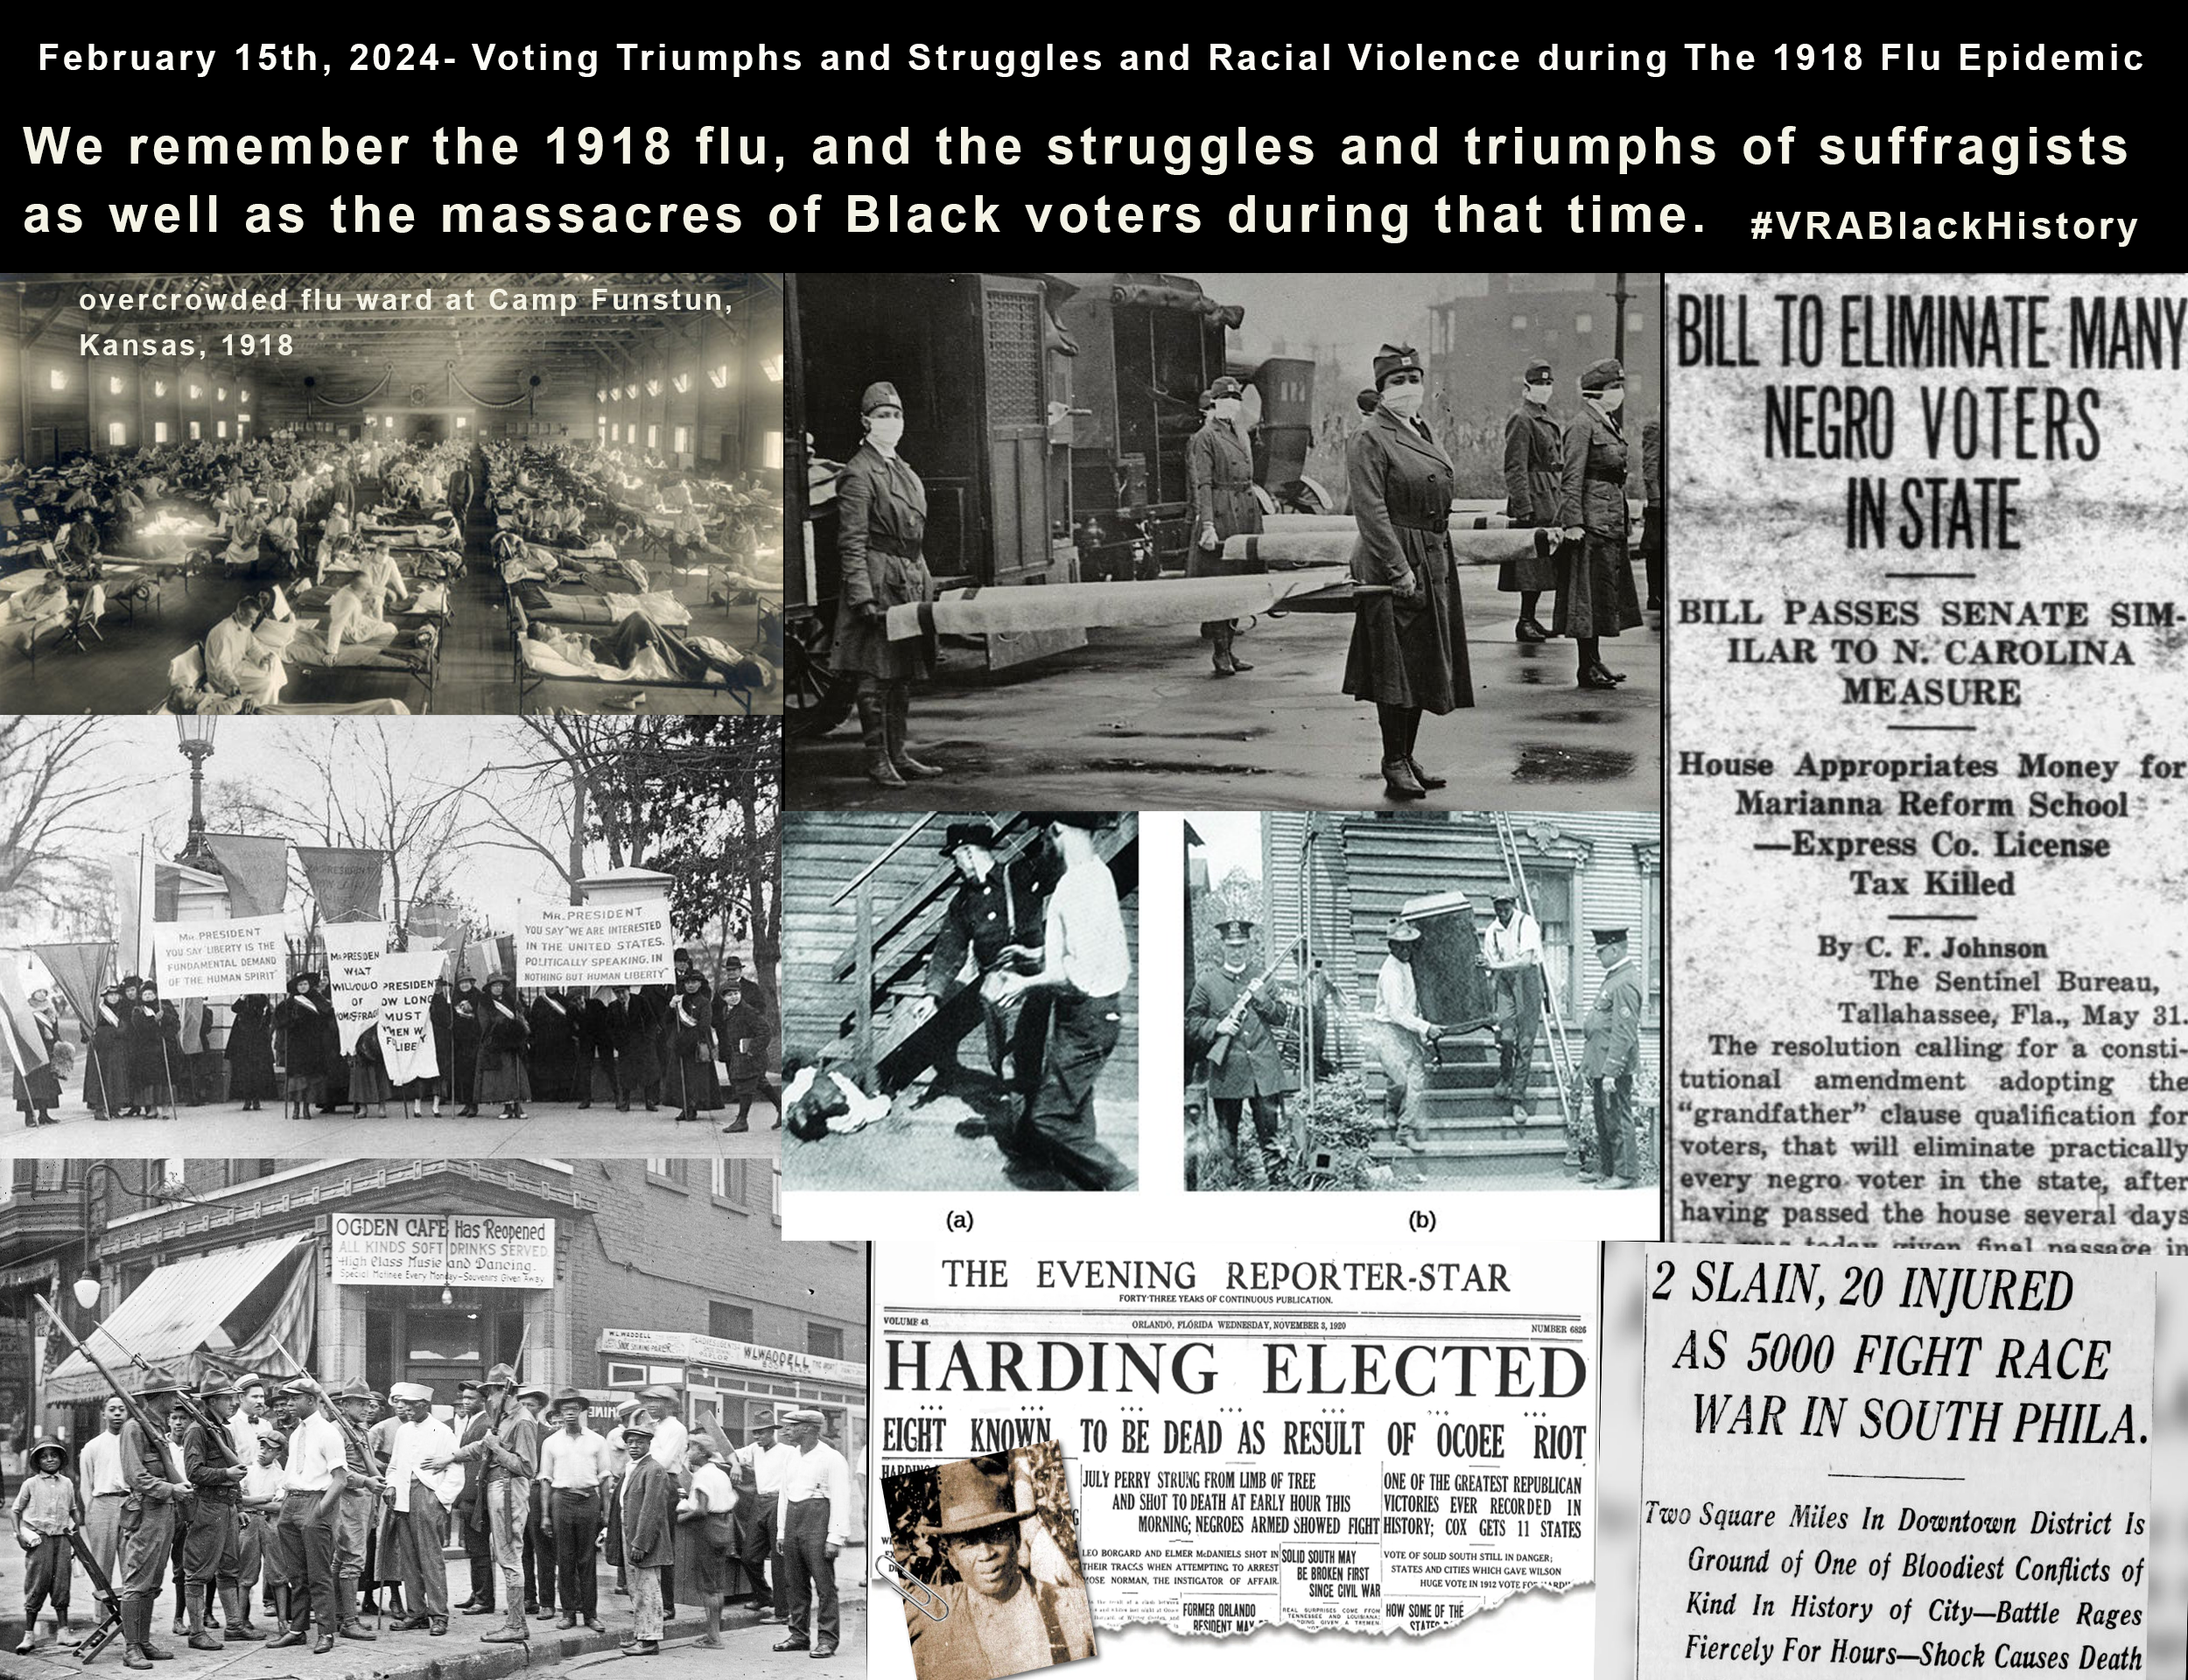 February 15th, 2024- Voting Triumphs and Struggles and Racial Violence during The 1918 Flu Epidemic #VRABlackHistory